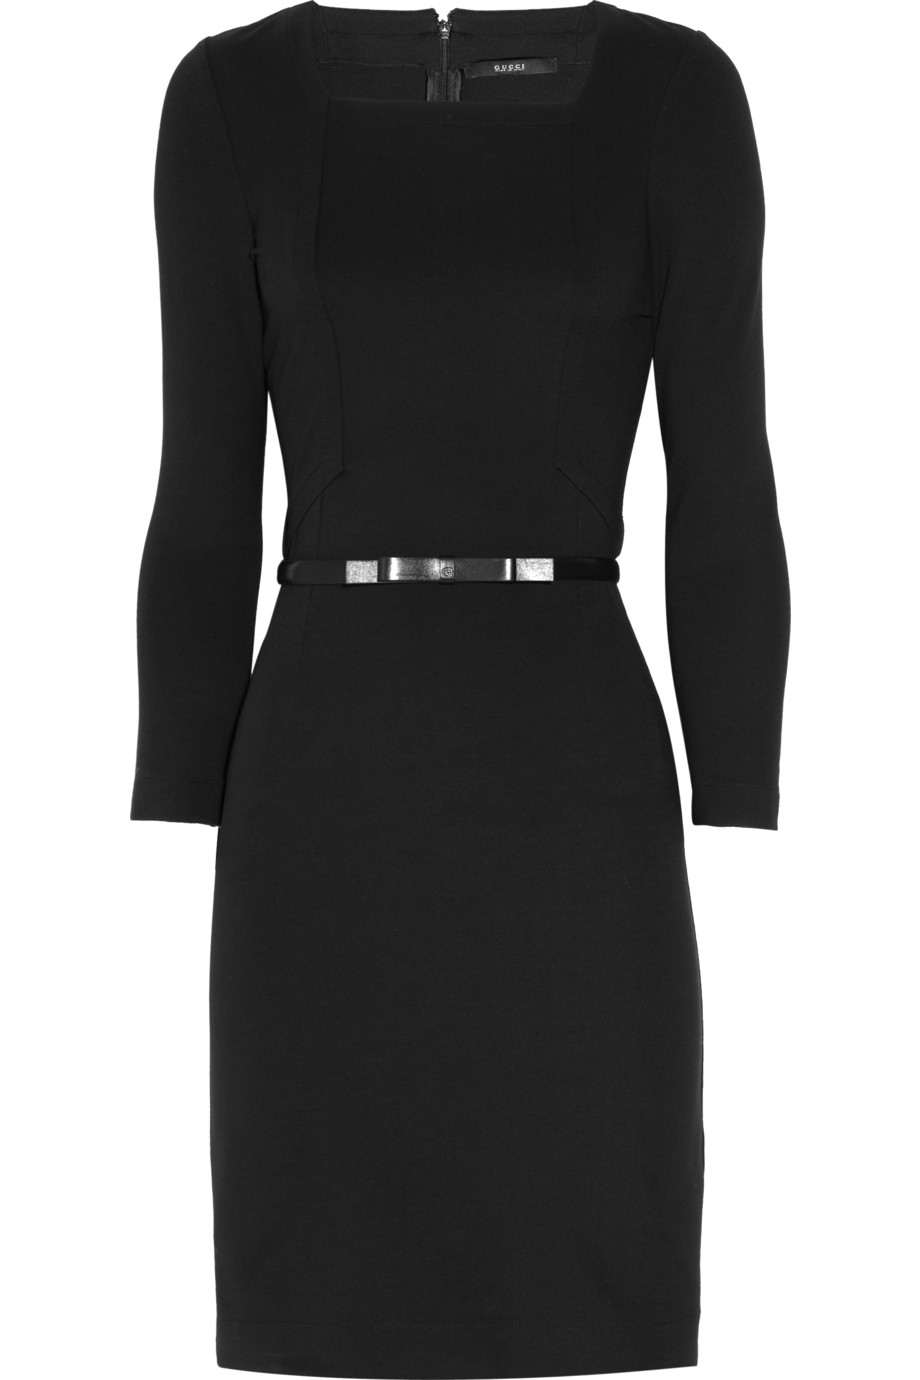 Gucci Belted Stretch-jersey Dress in Black | Lyst